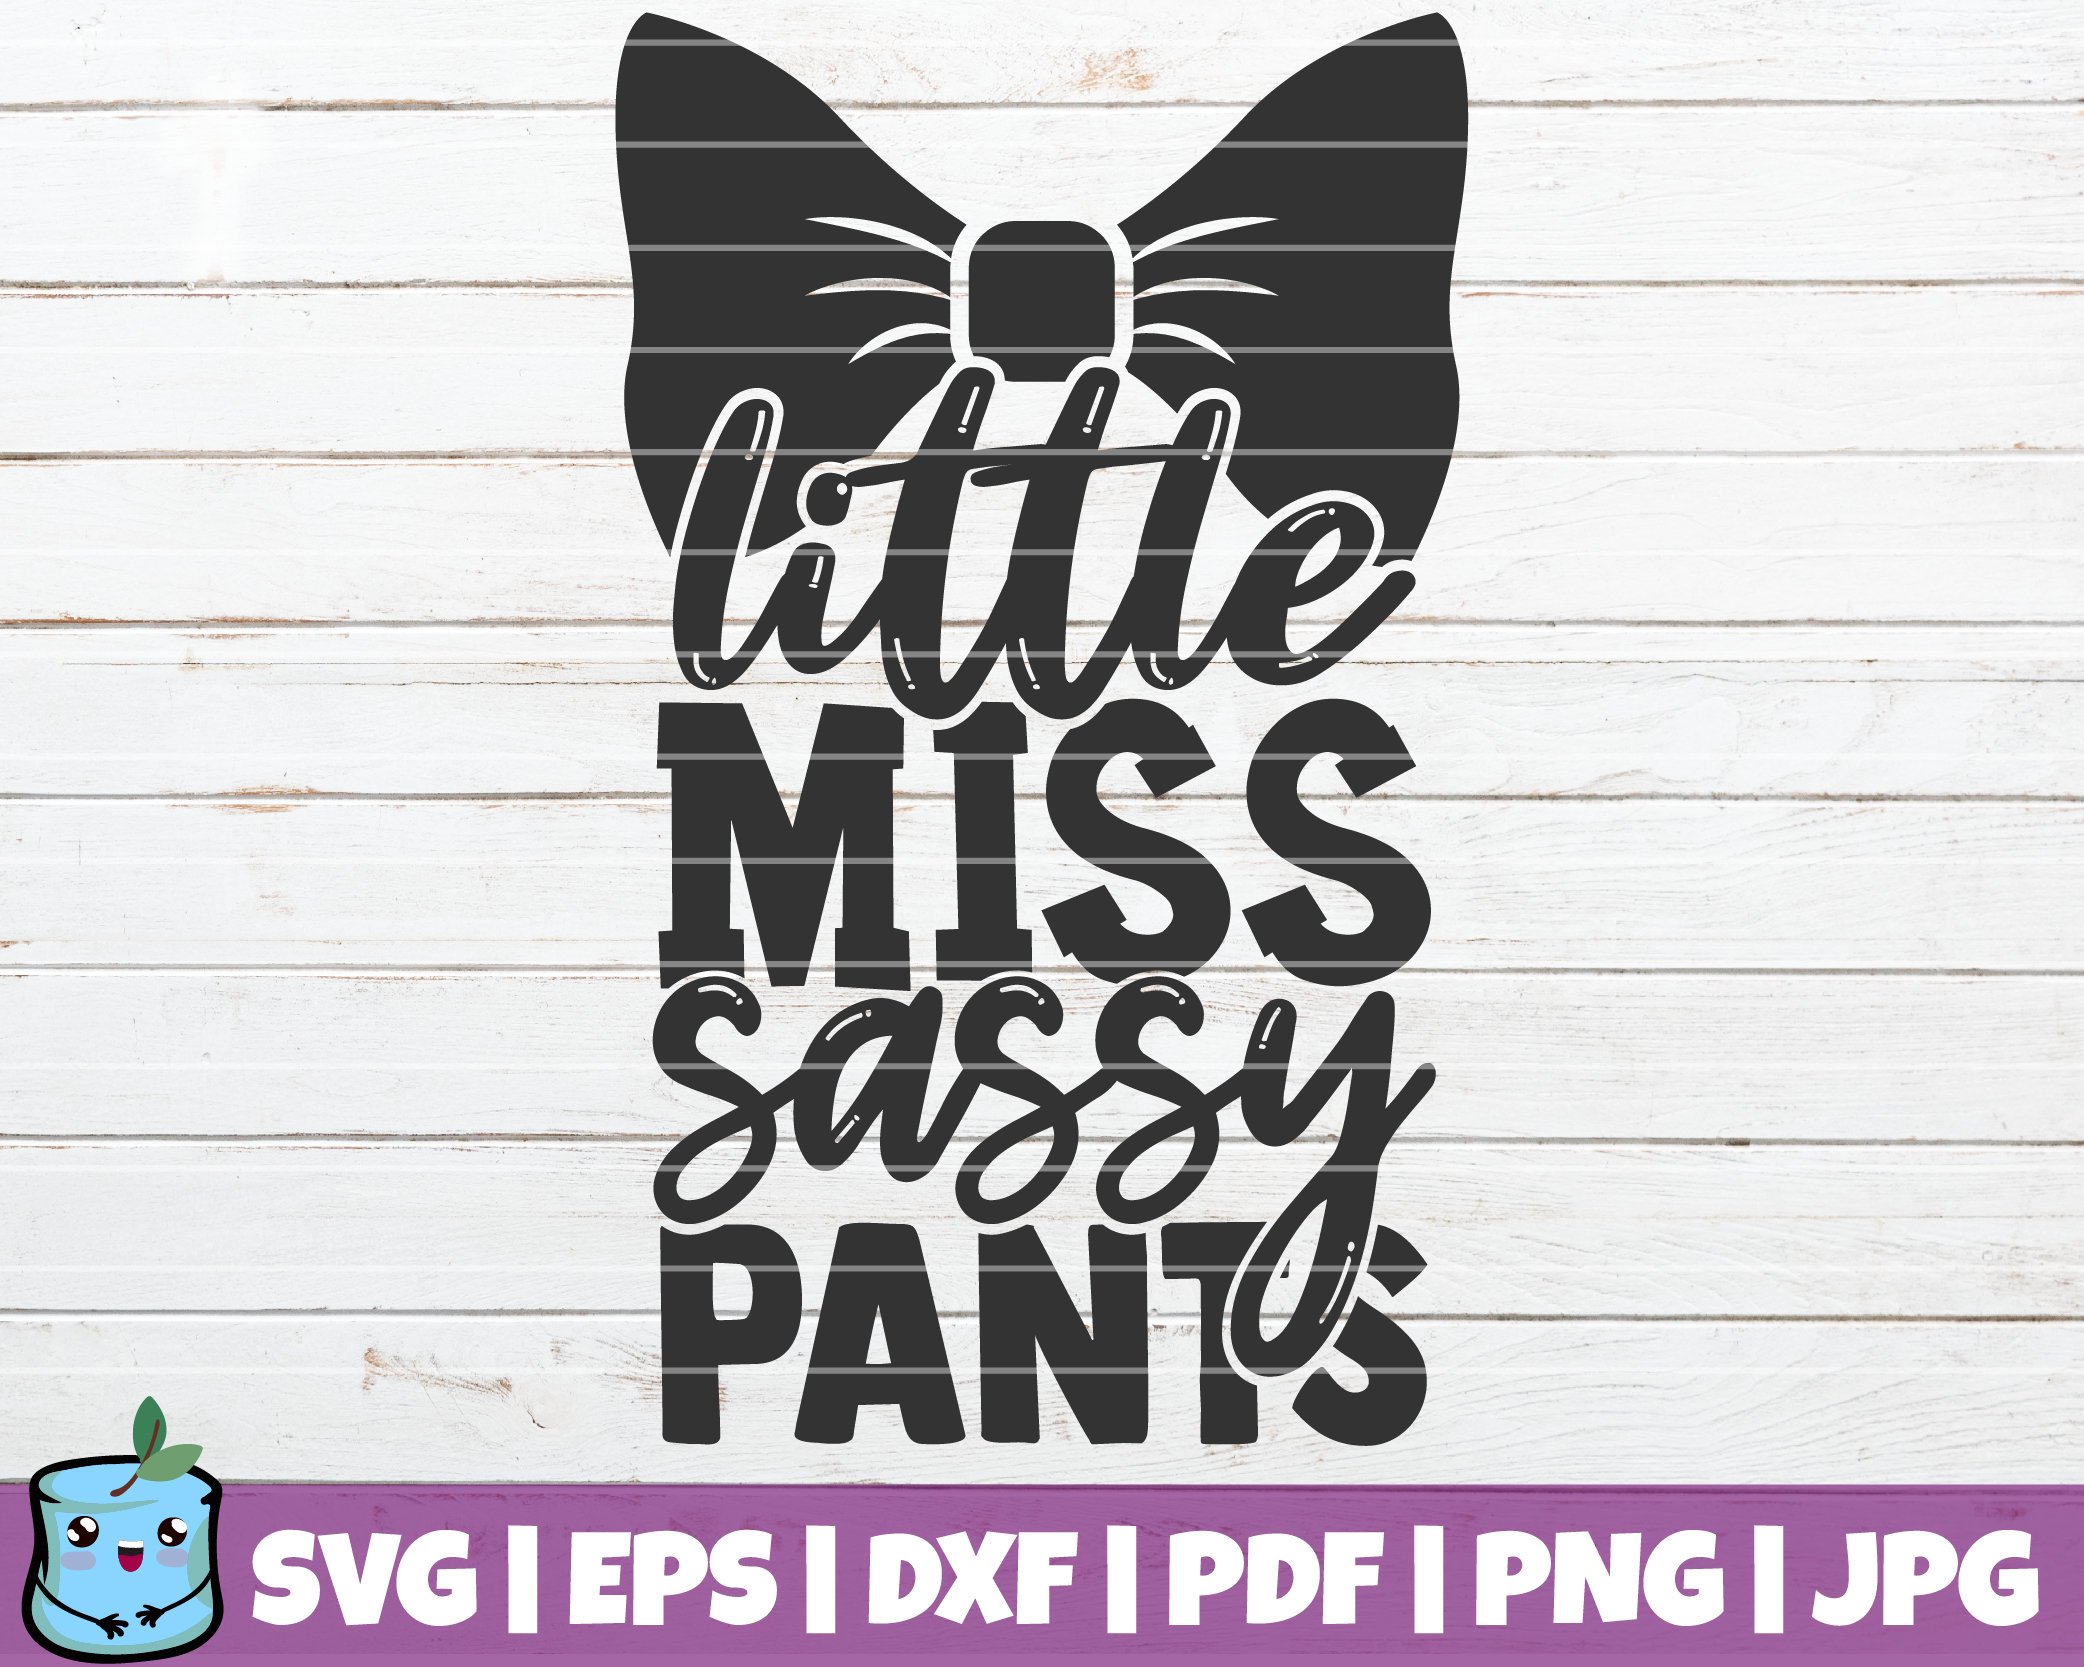 Little Miss Sassy Pants SVG Cut File | commercial use | instant download |  vector clip art | Sassy SVG | Bossy Woman | Sassy Pants